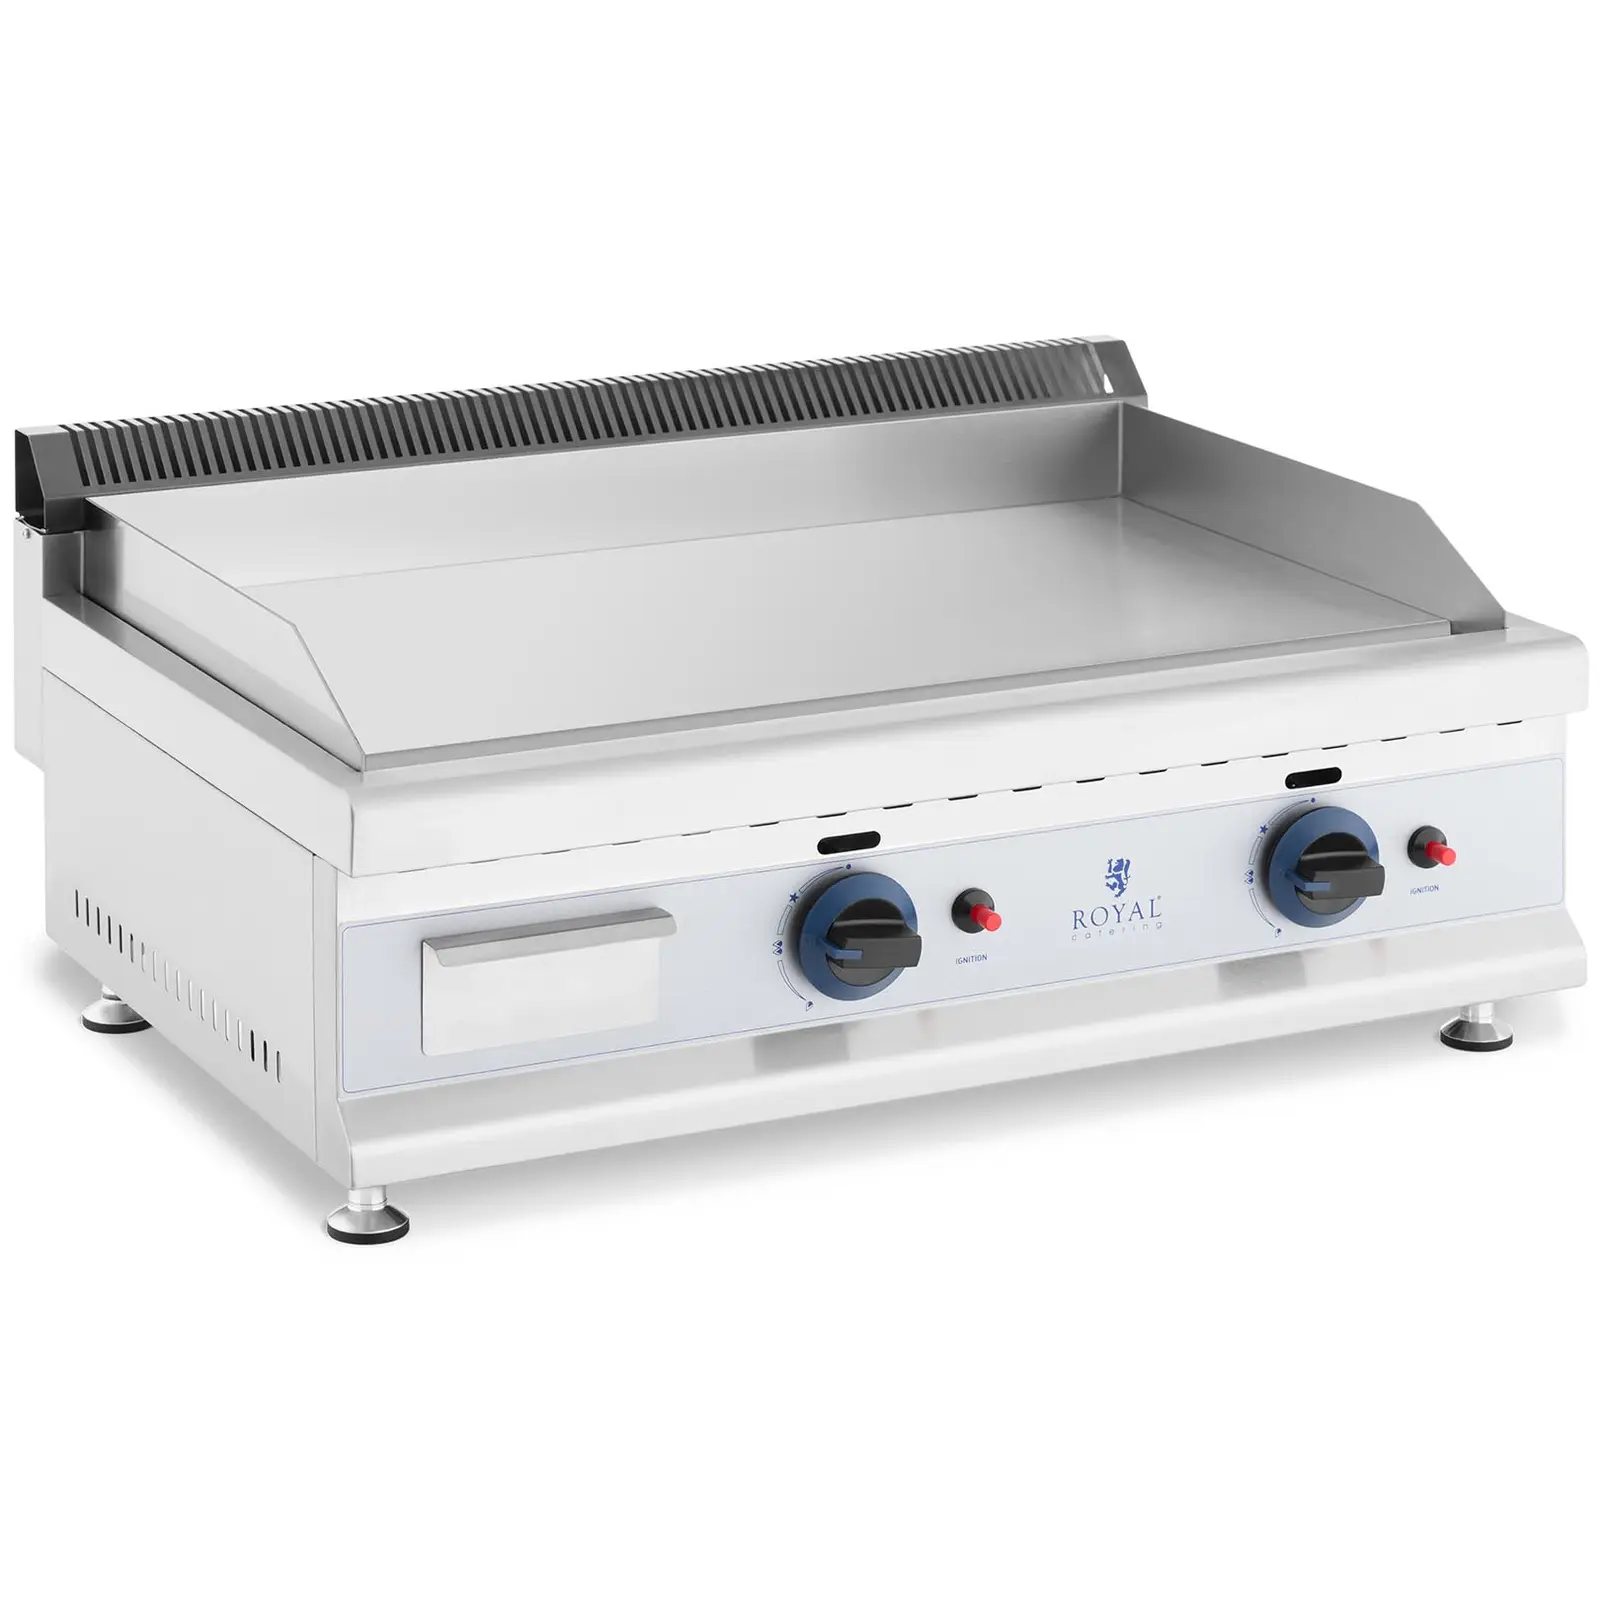 Gas Griddle - 74.5 x 40 cm - smooth - 2 x 3,100 W - Natural gas - 20 mbar